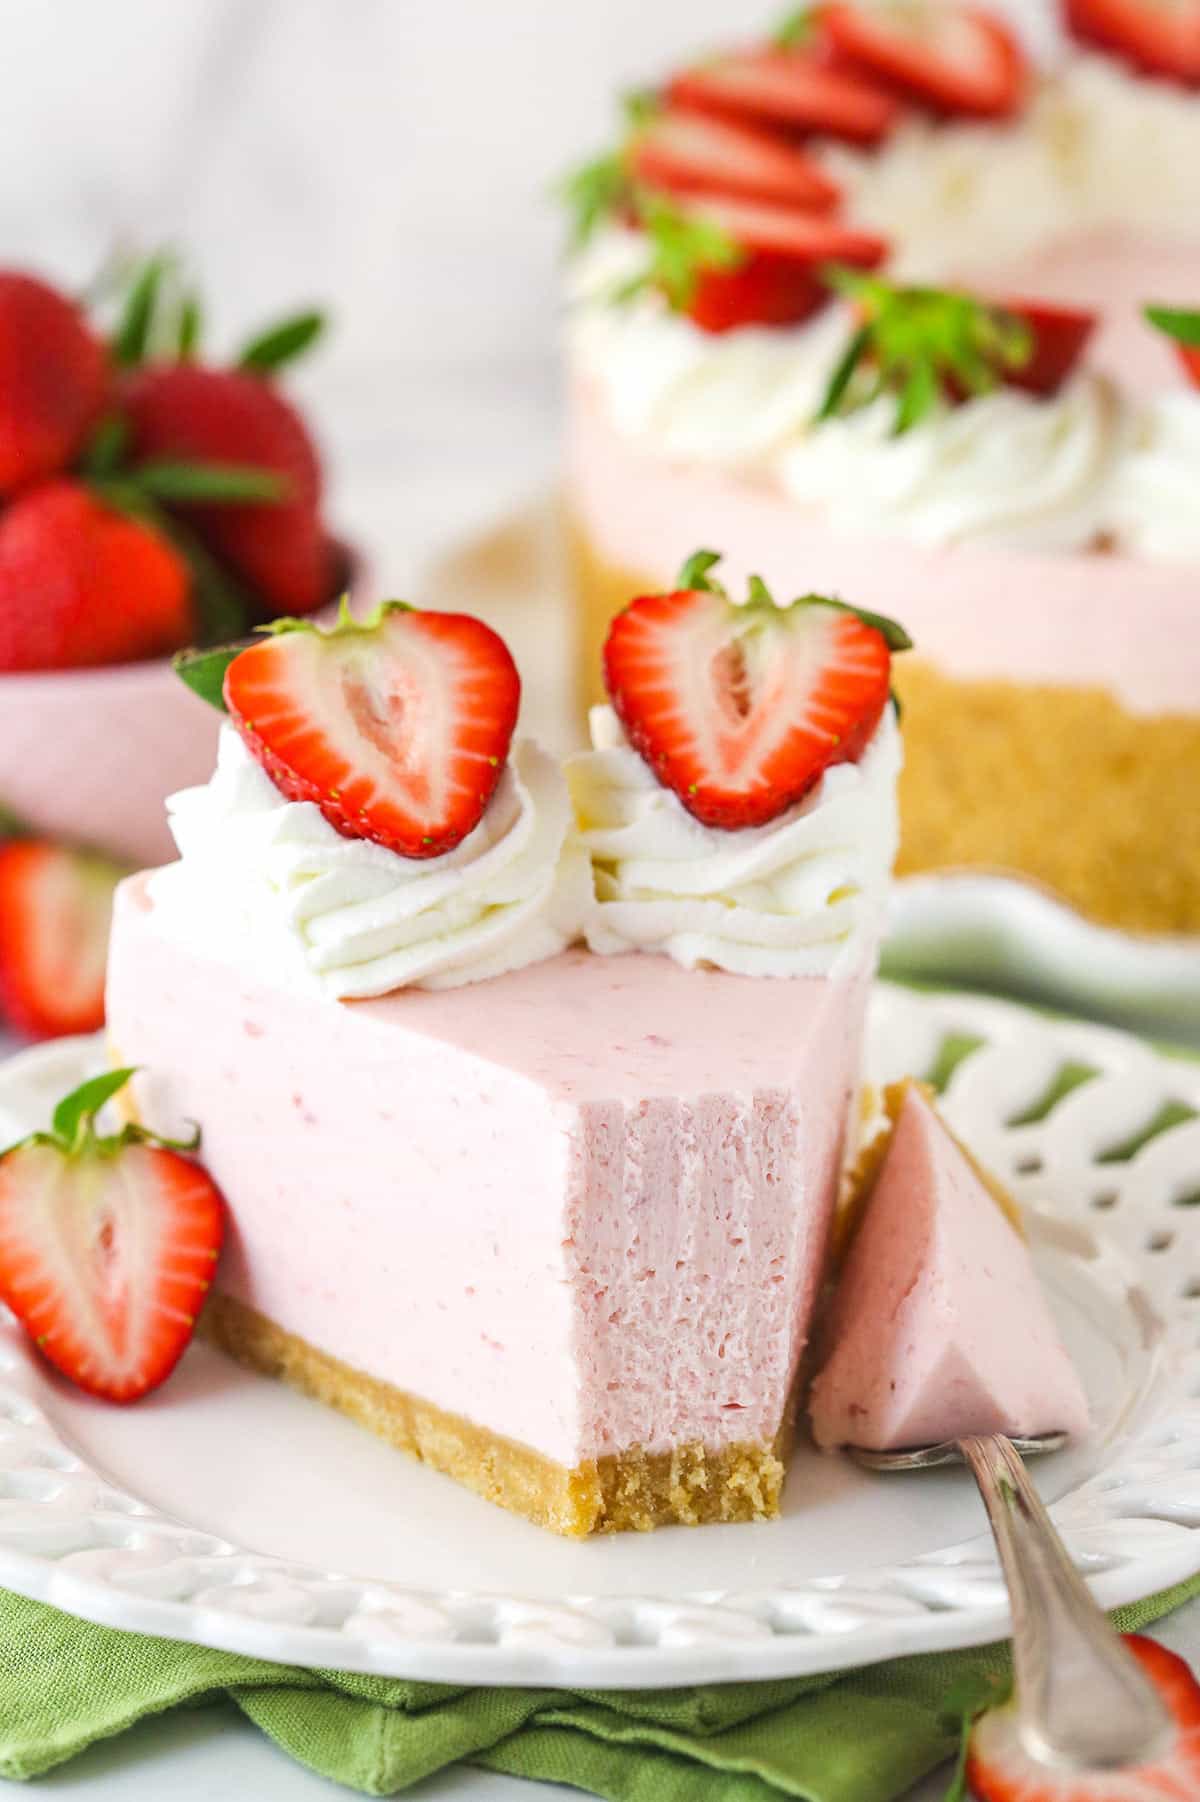 A slice of no bake strawberry cheesecake on a plate with a fork taking a bite out of it.